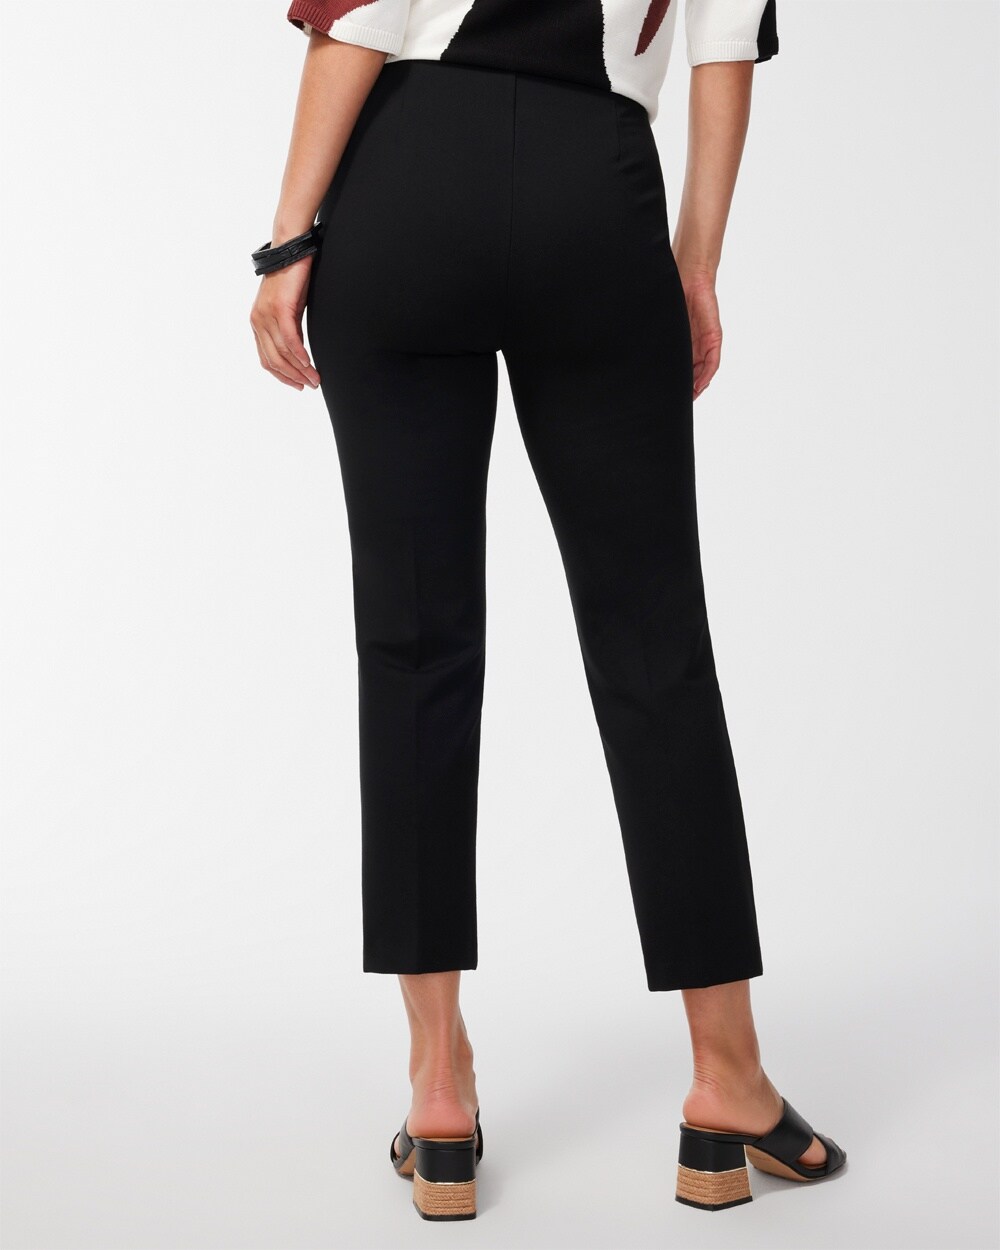 Chico's So Slimming Crop Black Ponte Knit Pants Size 2 Large 12 - $27 -  From Susan